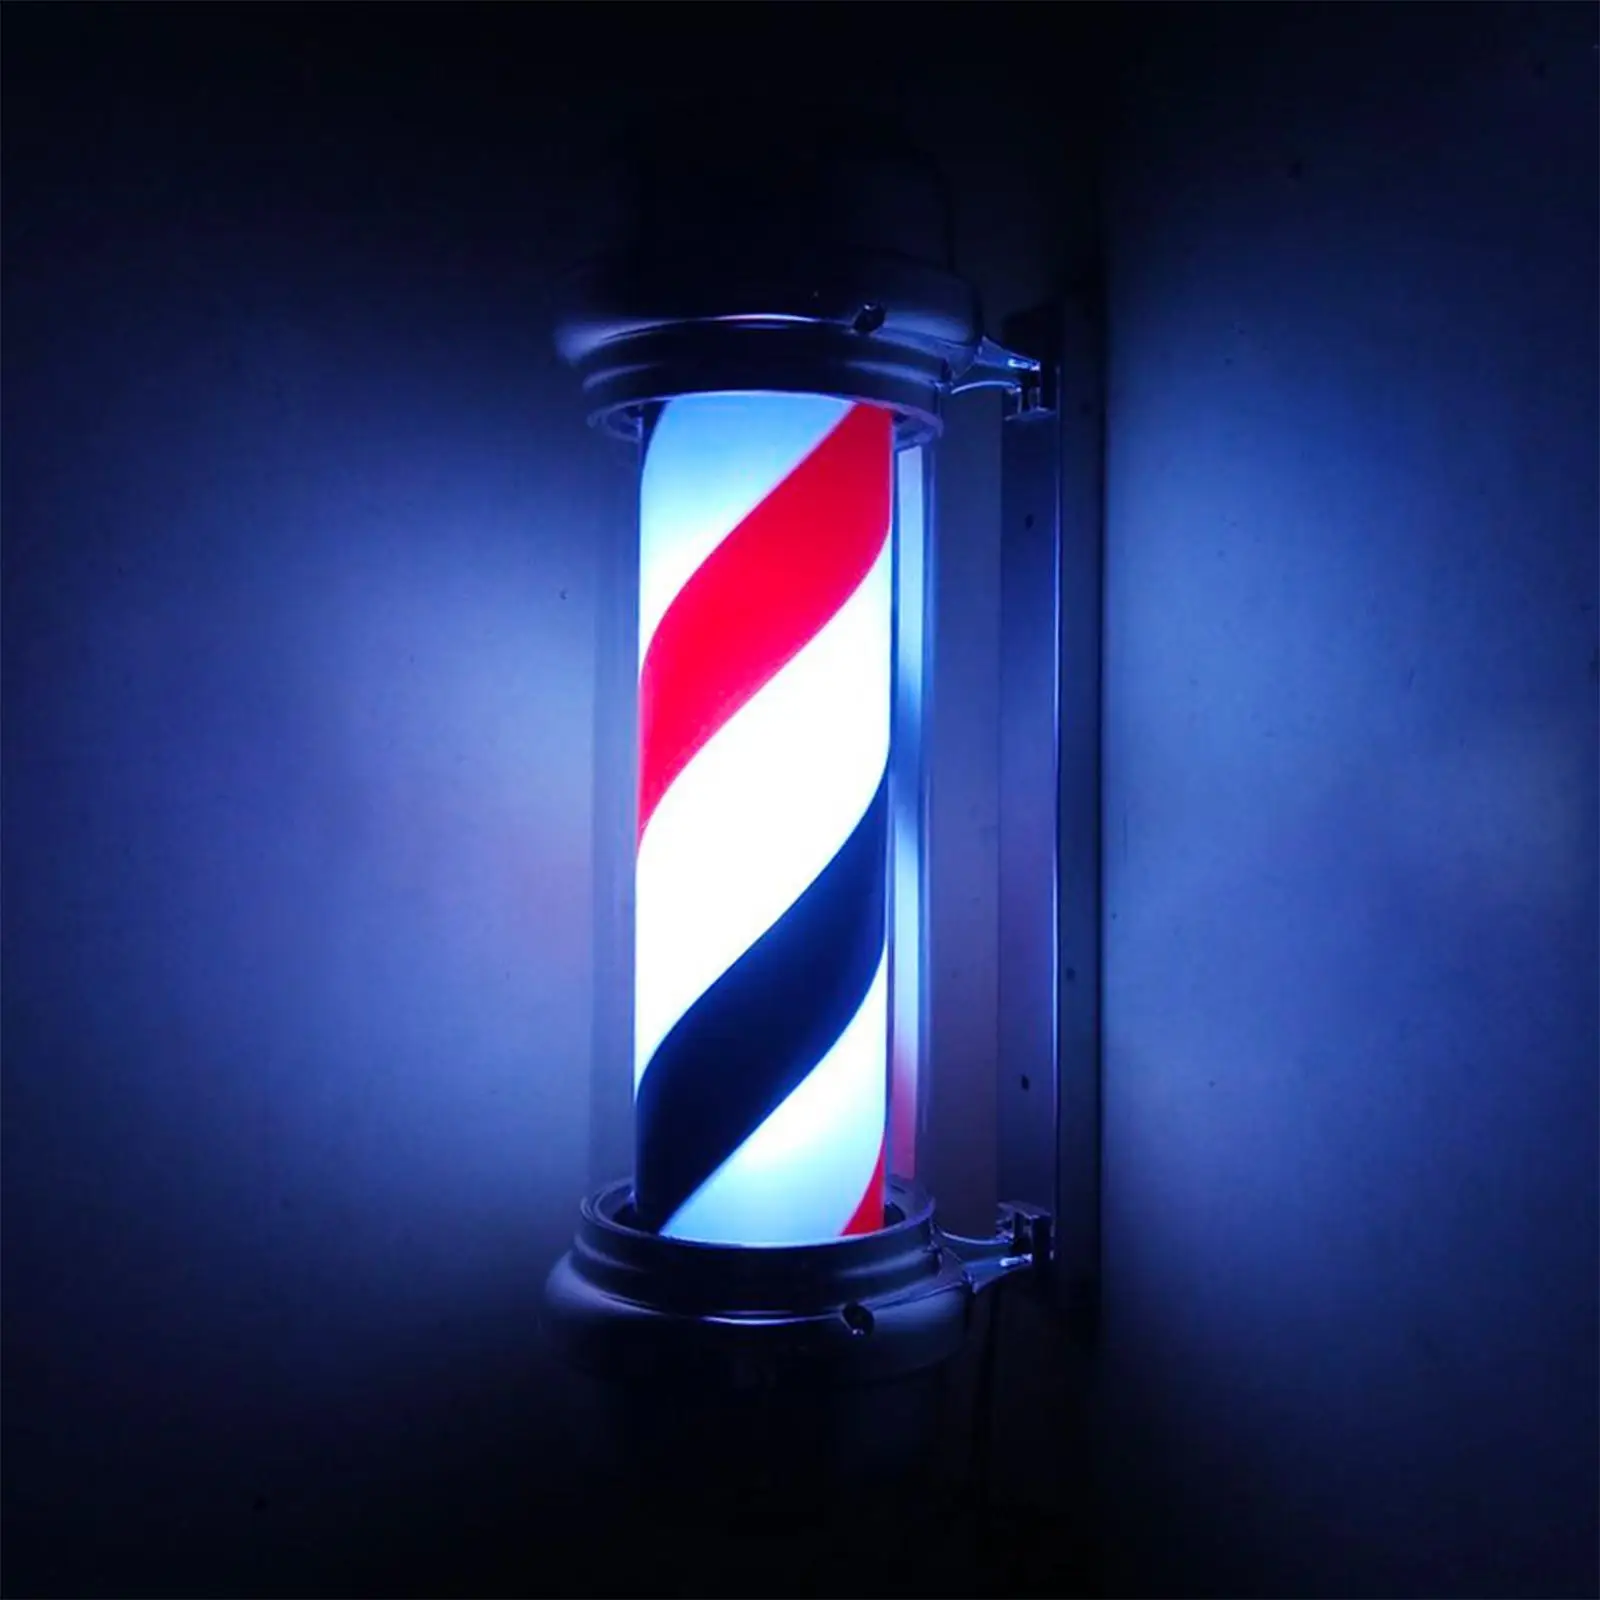 Rotating Barber Pole Lights LED Strips Lighting Wall Mounted Hair Salon Sign Open for Street Hairdressing Outdoor Barber Shop